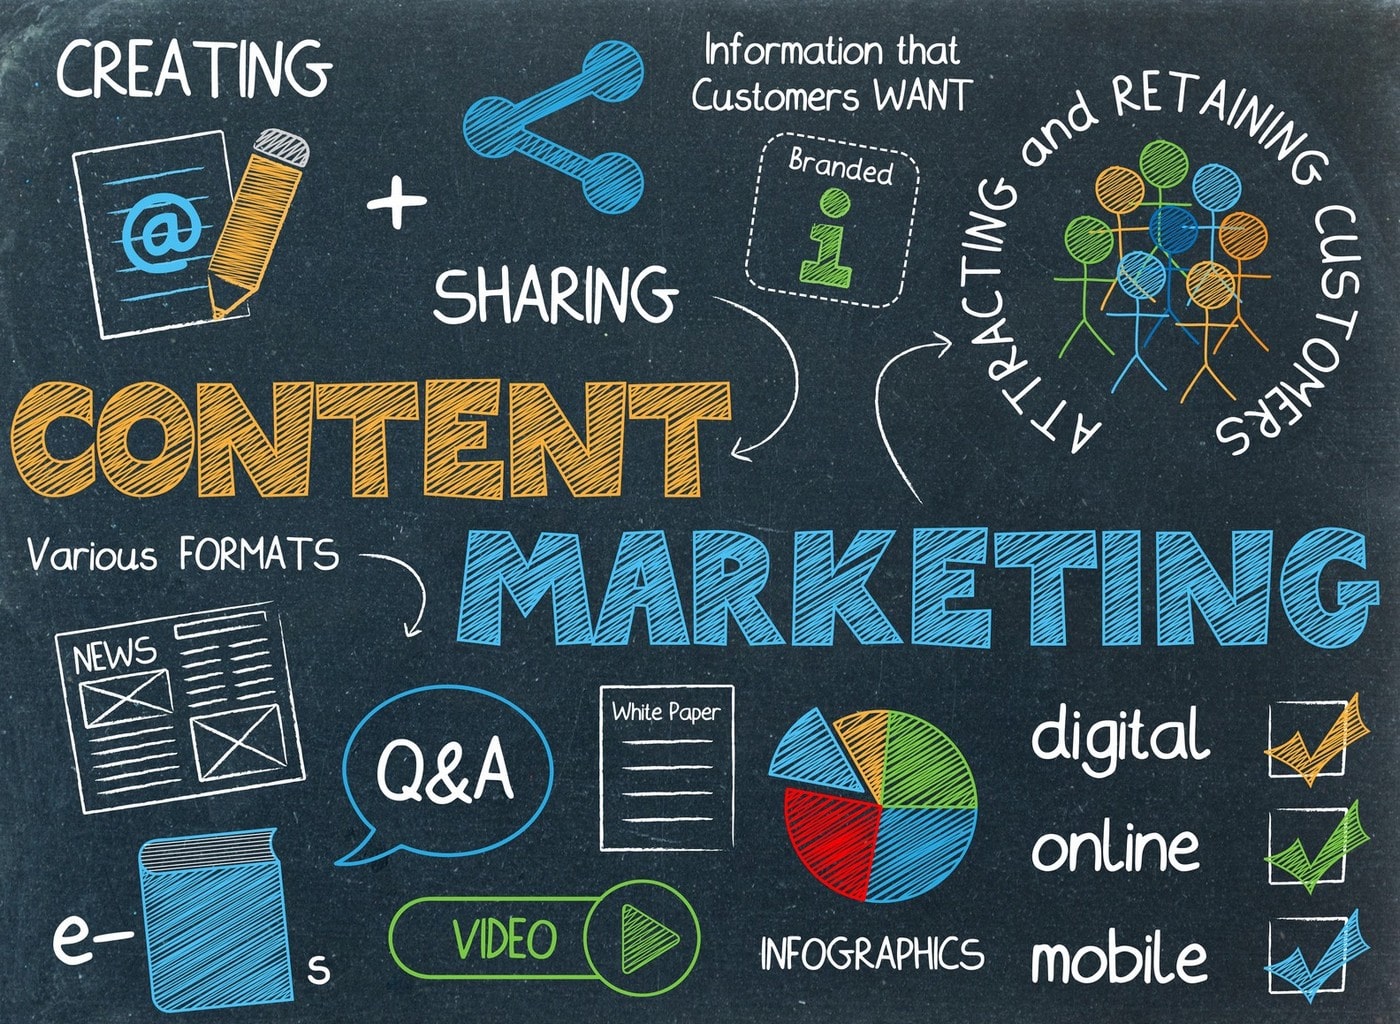 How Important Is Content Marketing To Your Digital Strategy?